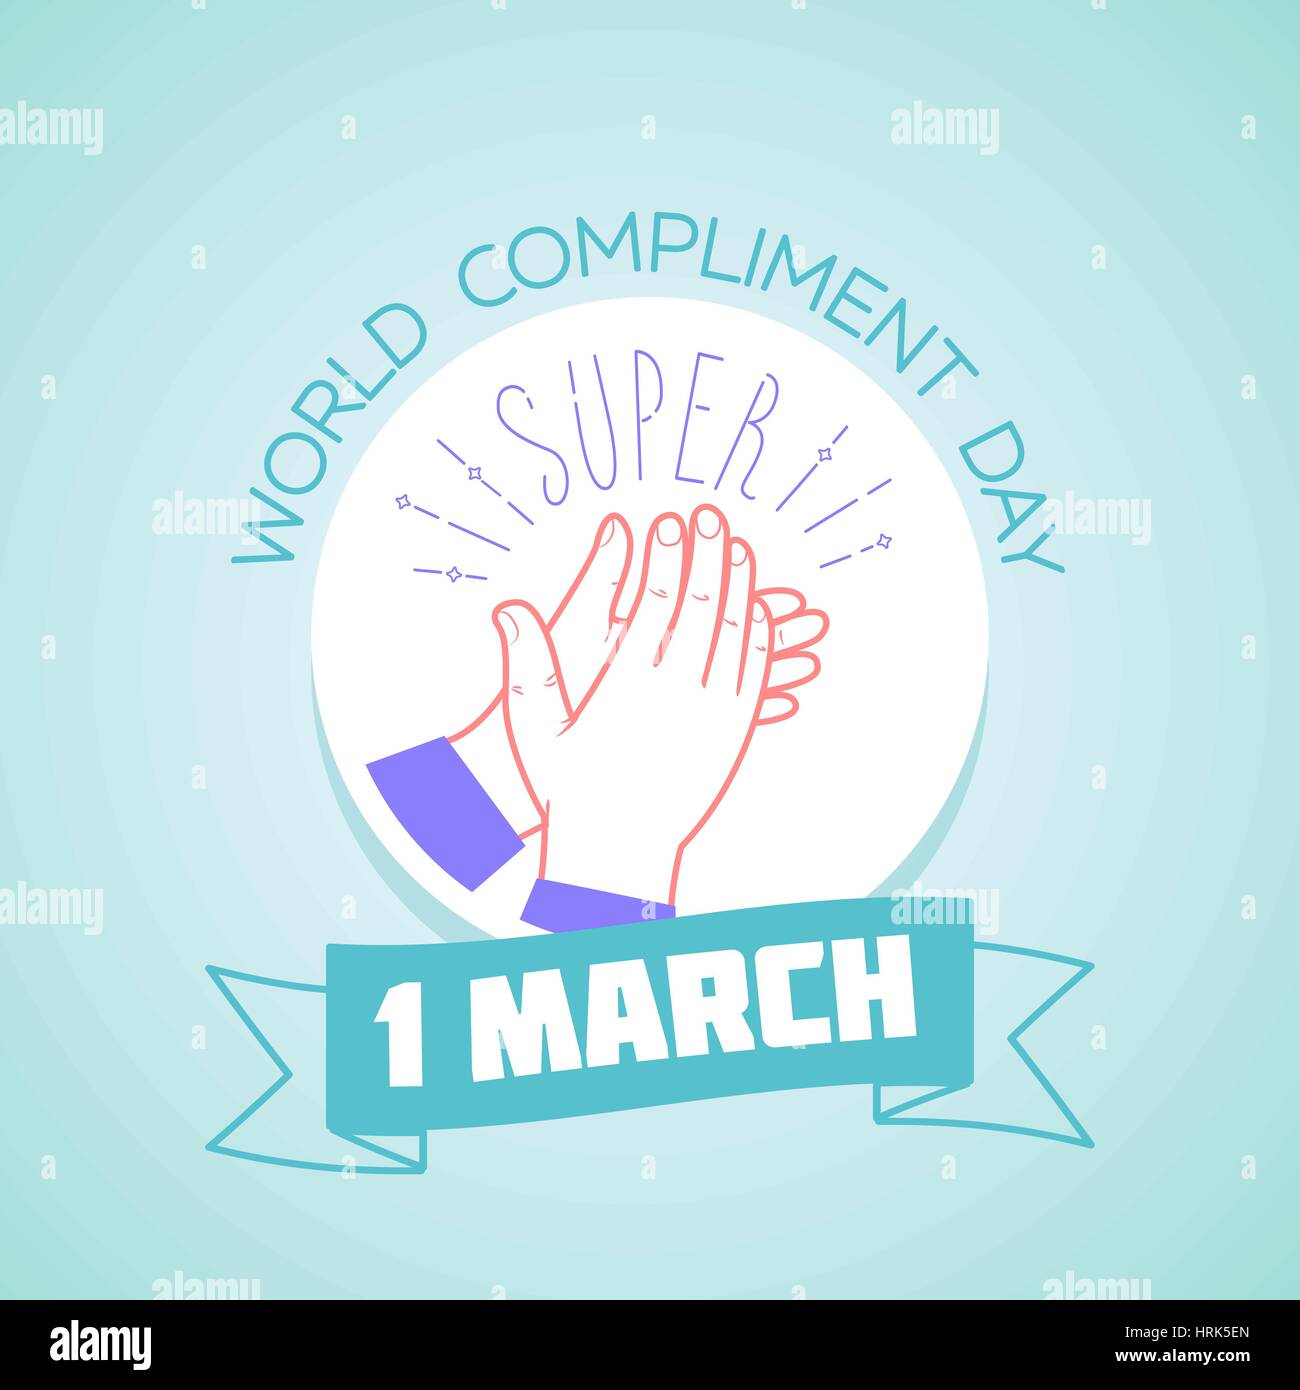 Calendar for each day on march 1. Greeting card. Holiday - Compliment Day. Icon in the linear style Stock Vector